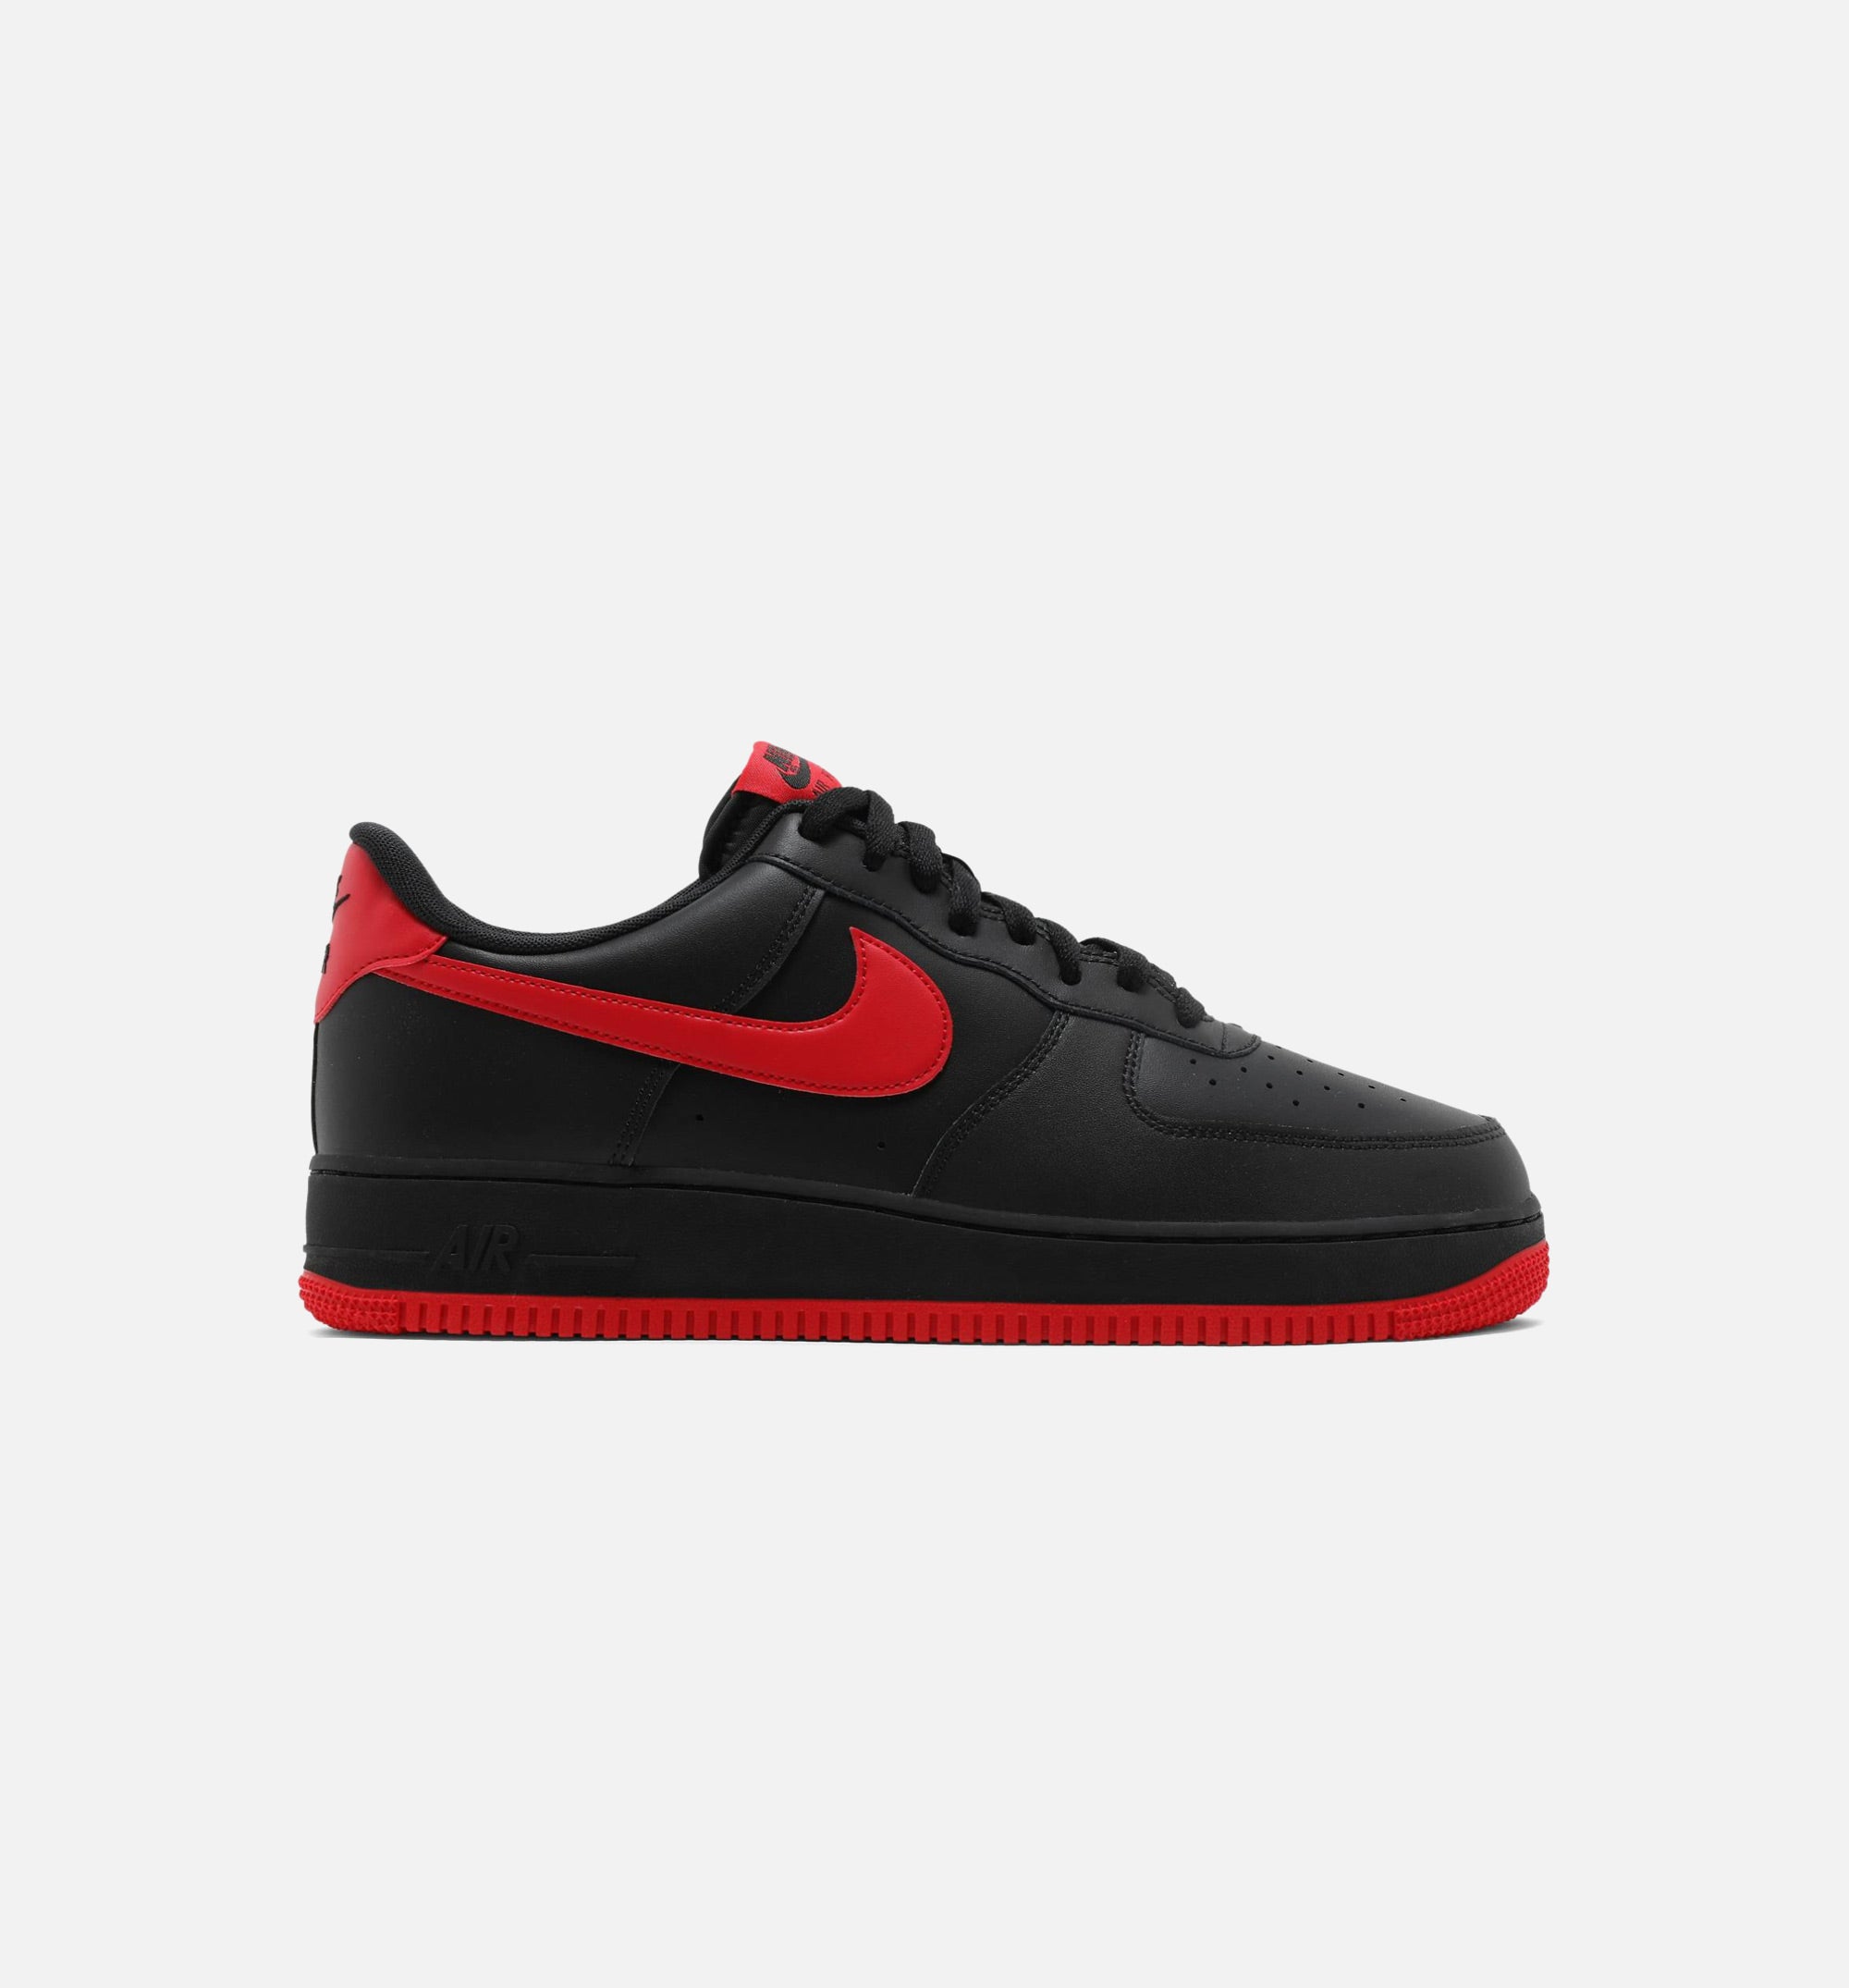 Nike DC2911-001 Air Force 1 Low Bred Mens Lifestyle Shoe - Black